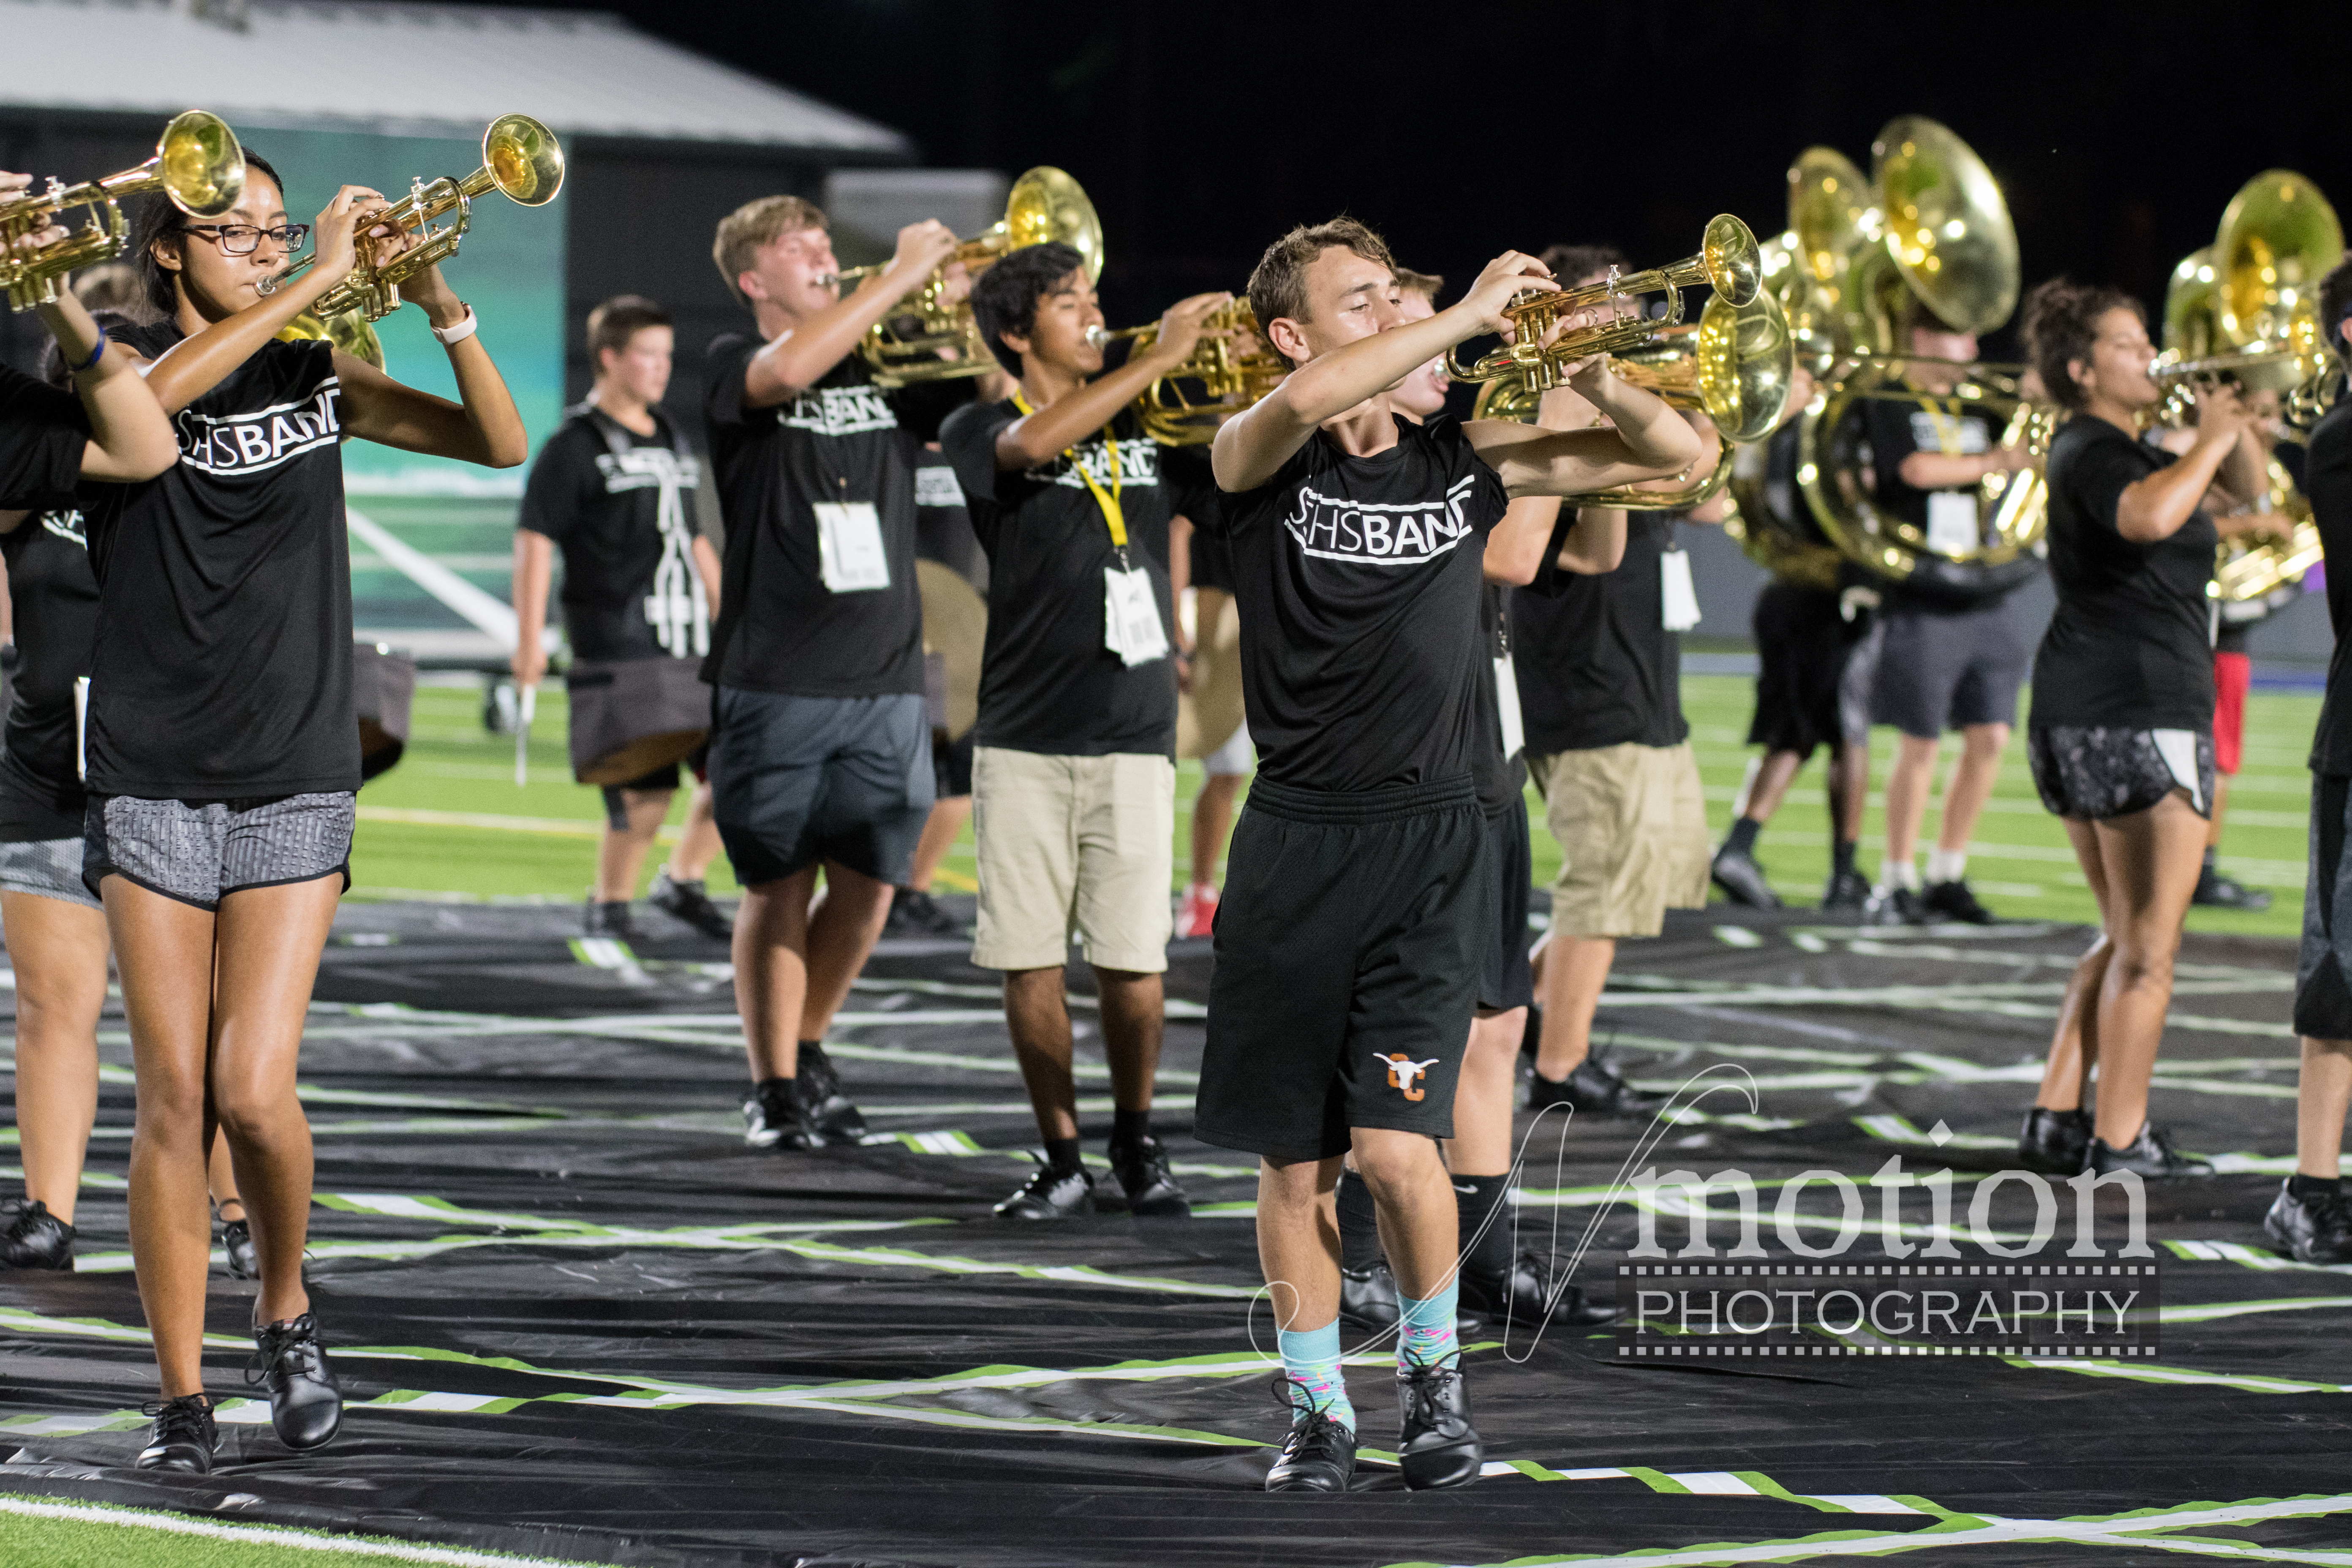 Sulphur Springs Wildcat Marching Band Performs Halftime Show Monday Night. Photos by Cathy Bryan of Nmotion Photography!